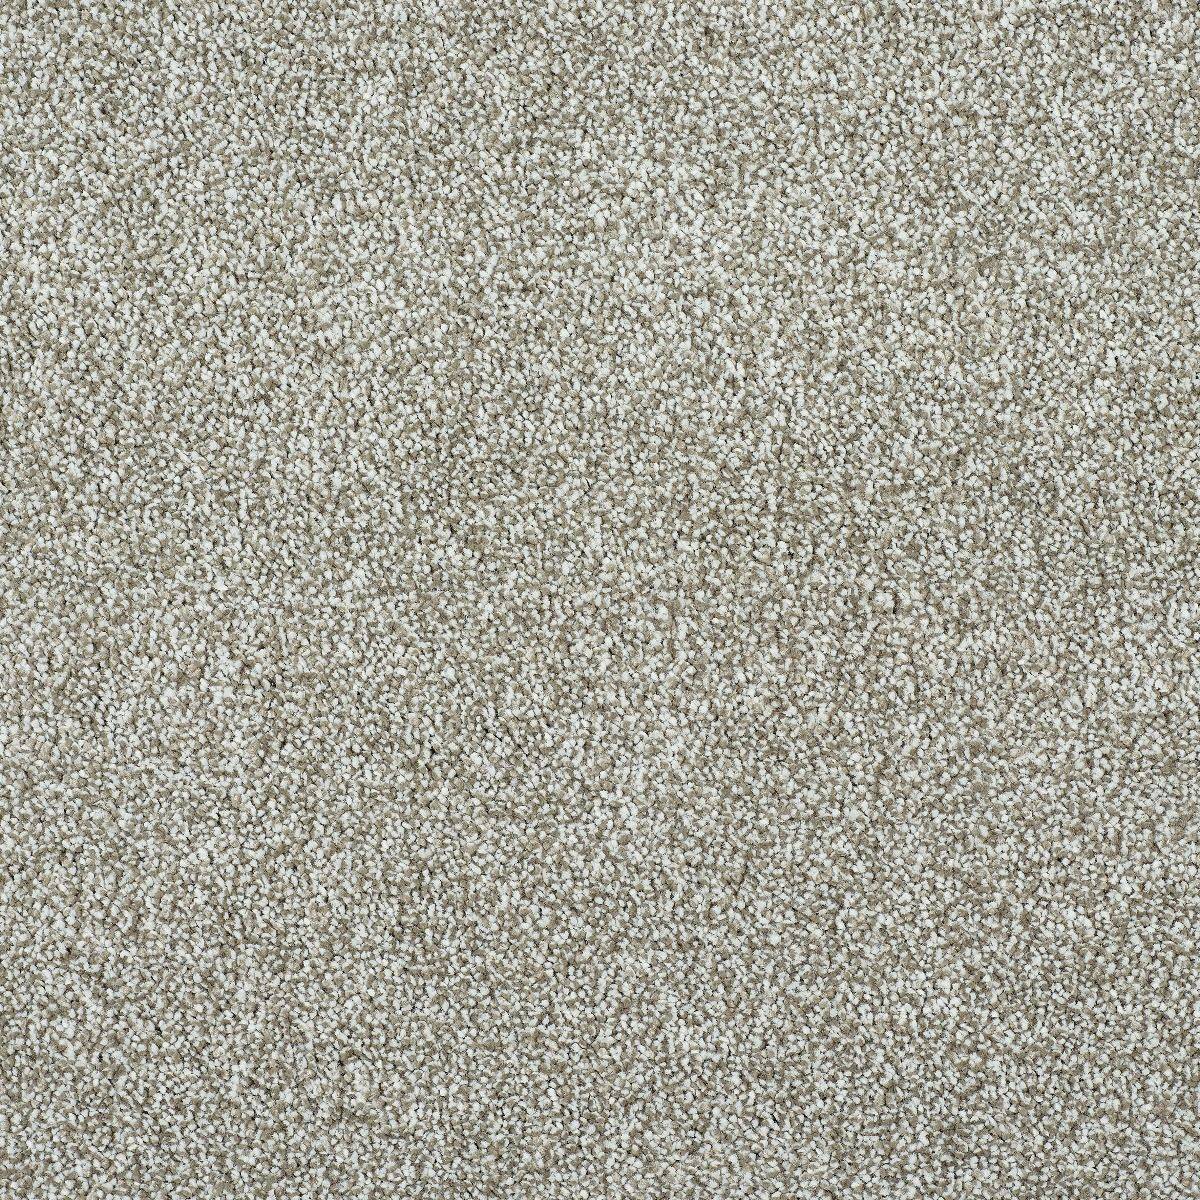 Abingdon Carpets Stainfree Affection Hessian